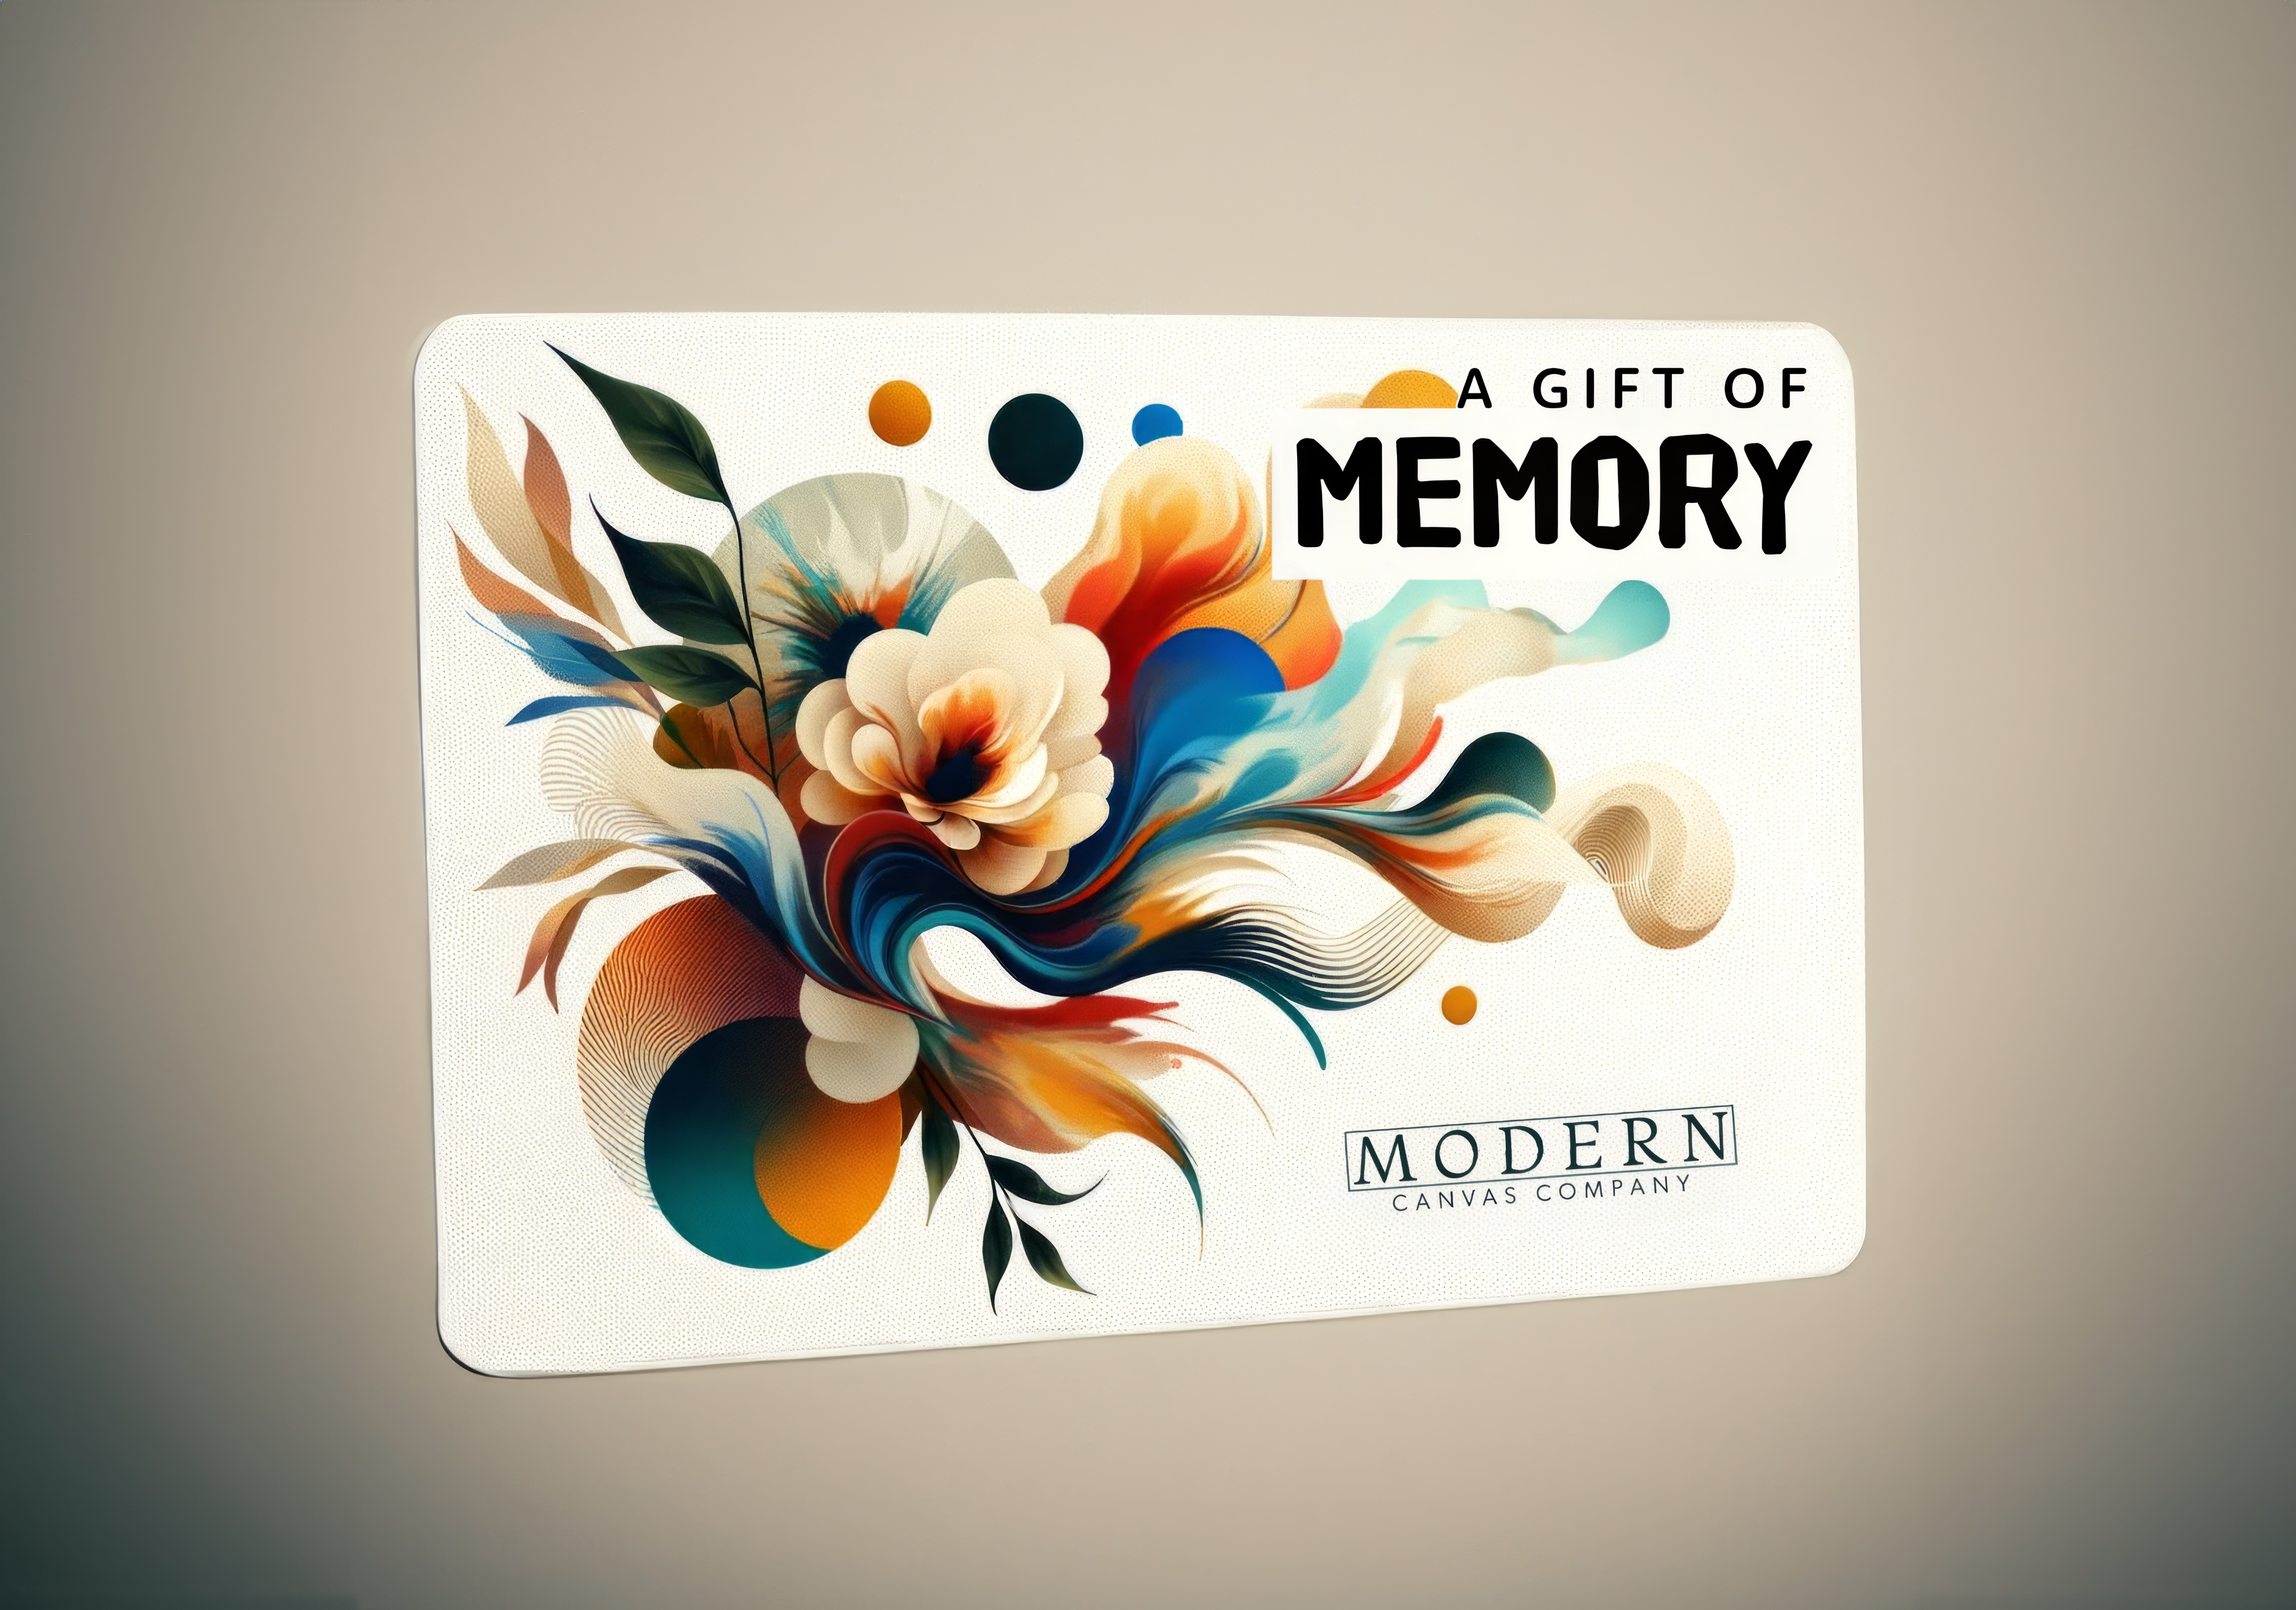 Modern Canvas Company Gift Card – Unlock a World of Giving Memories!